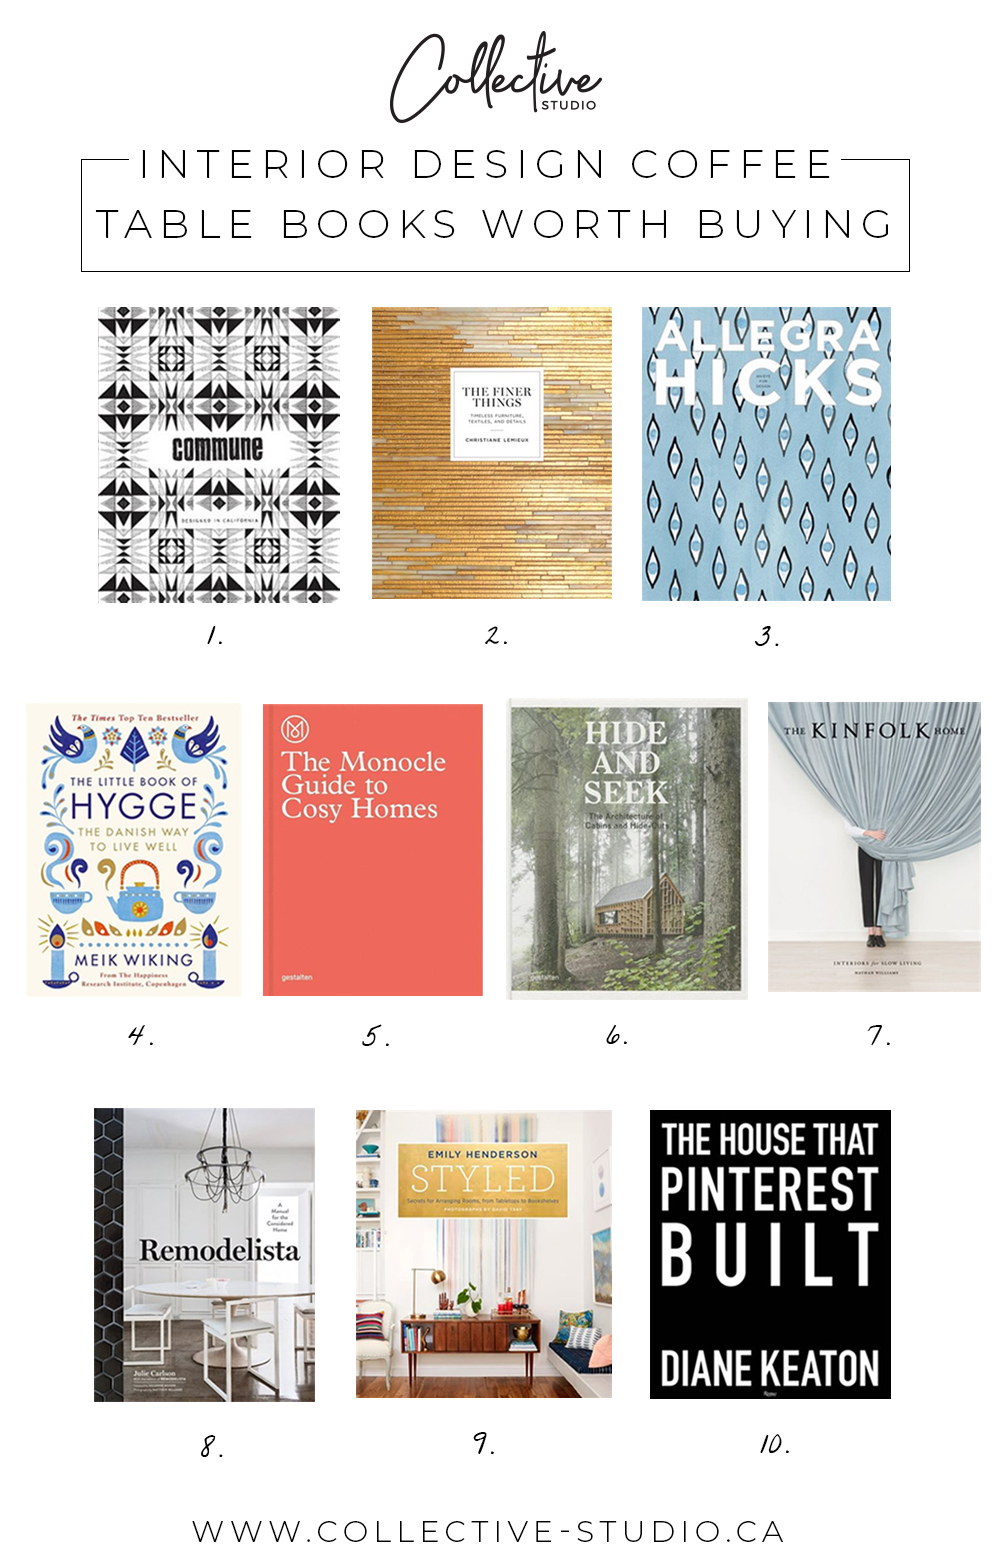 10 Things: Interior Design Coffee Table Books Worth Buying